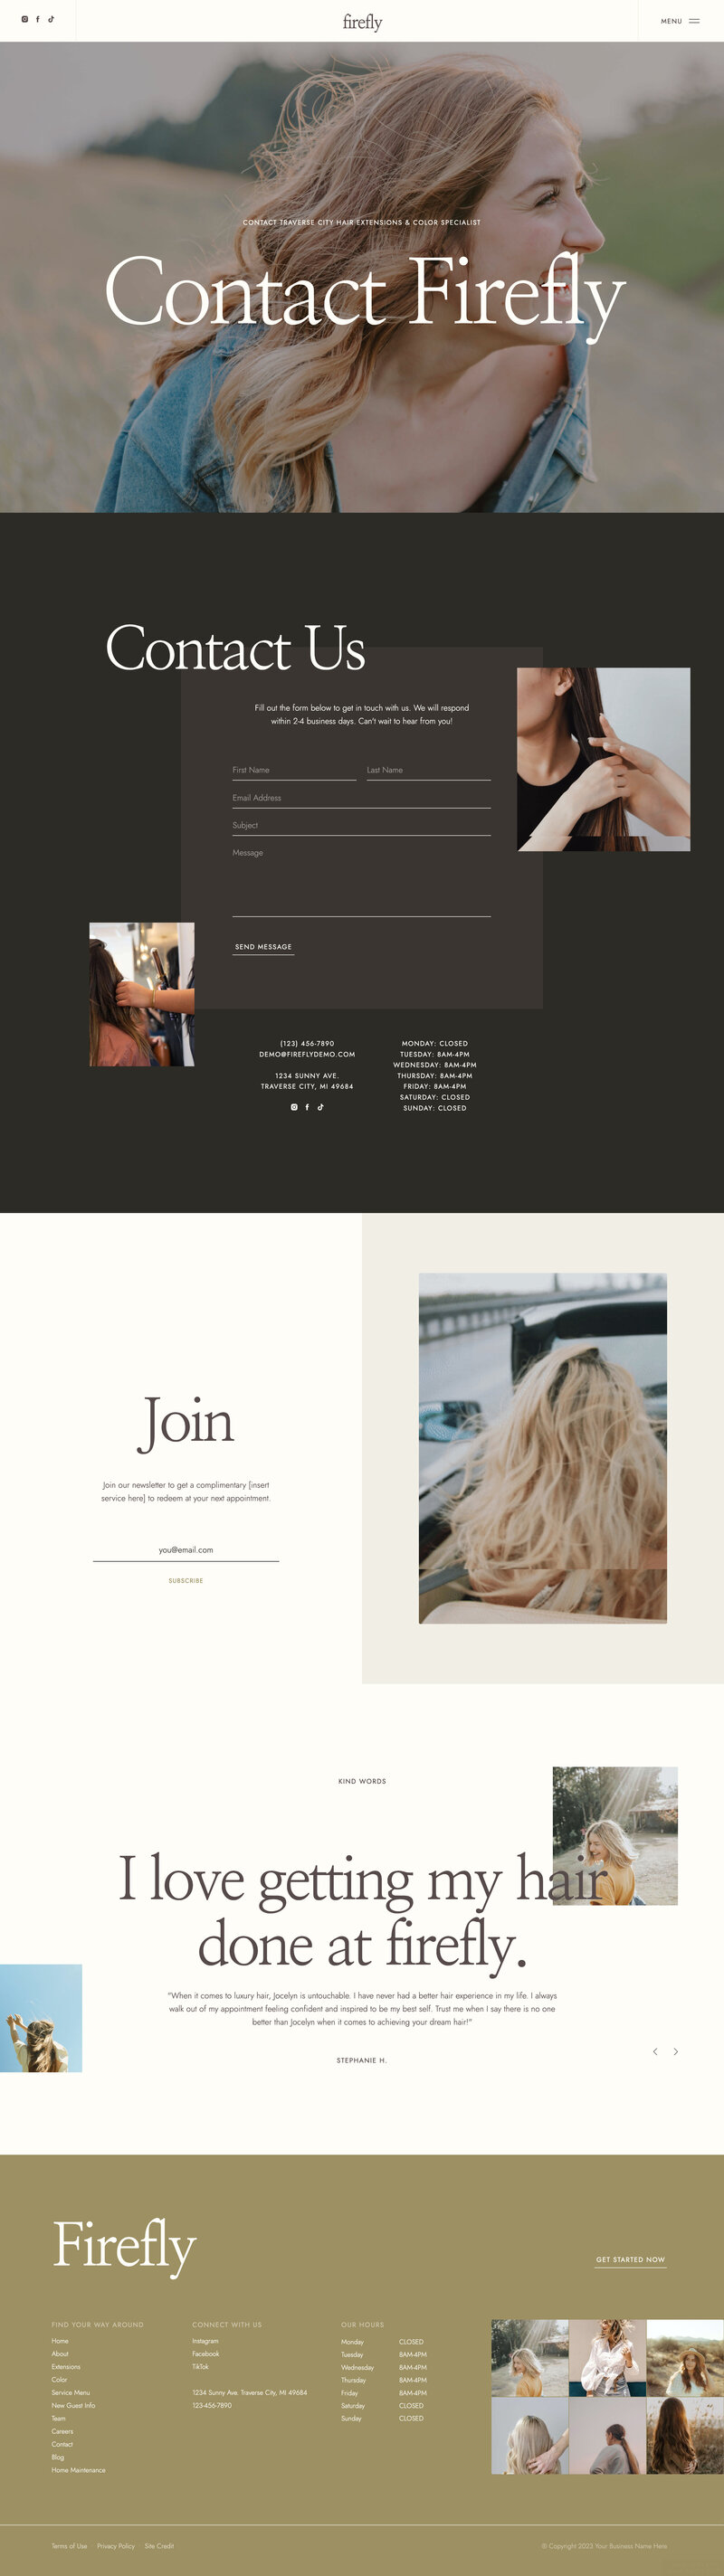 website-template-for-hair-stylists-salons-beauty-industry-firefly-franklin-and-willow--contact-2023-07-06-18_50_13